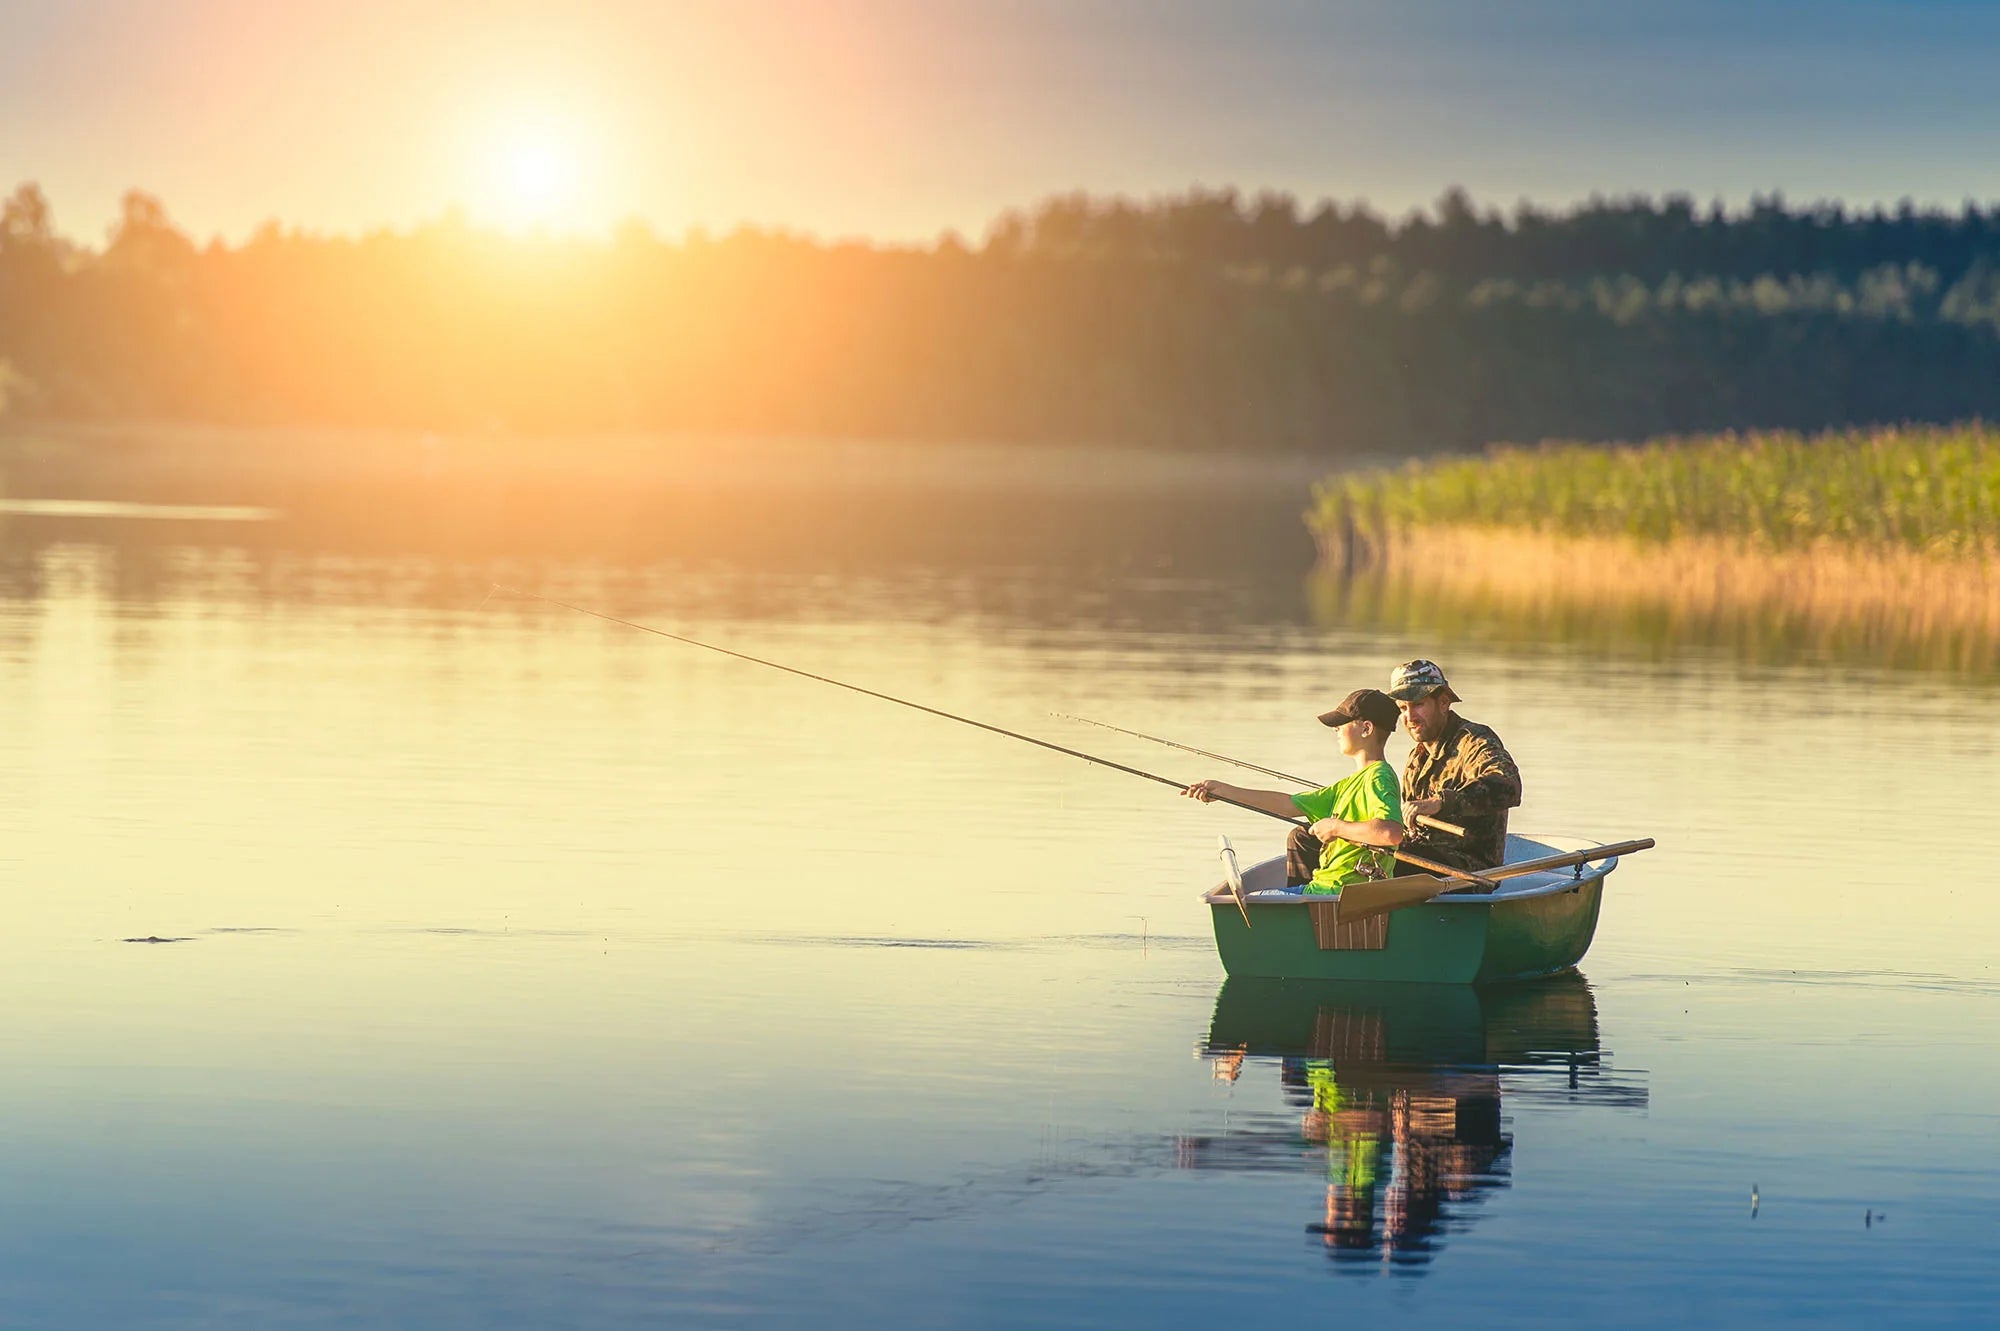 Father and son fishing on a boat in a lake